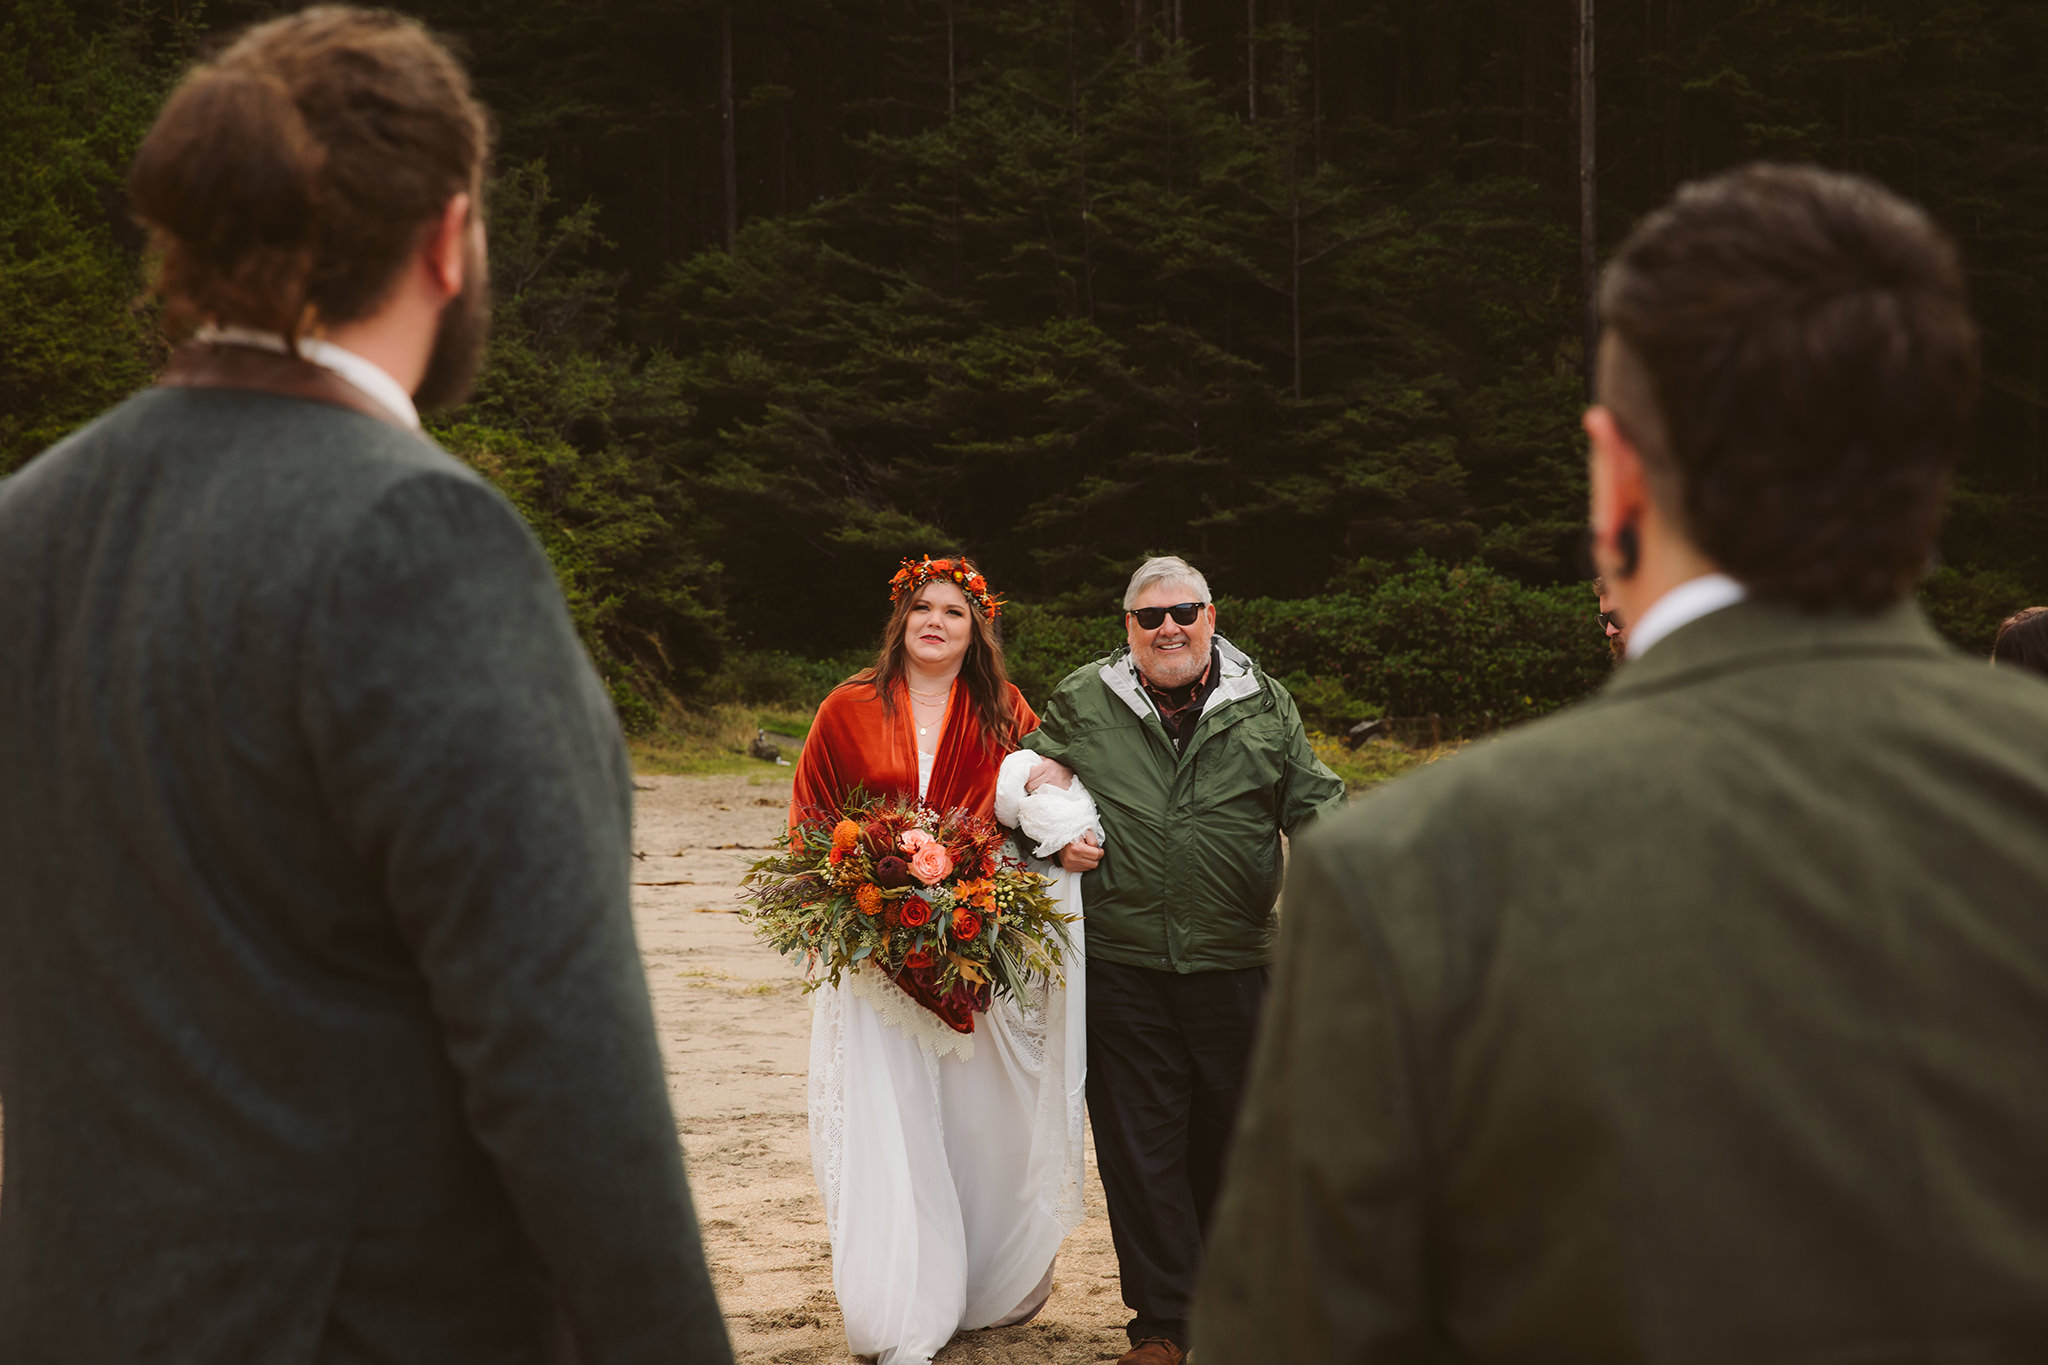 A father walking a bride down the aisle at her Simpson beach elopement in Coos Bay, Oregon